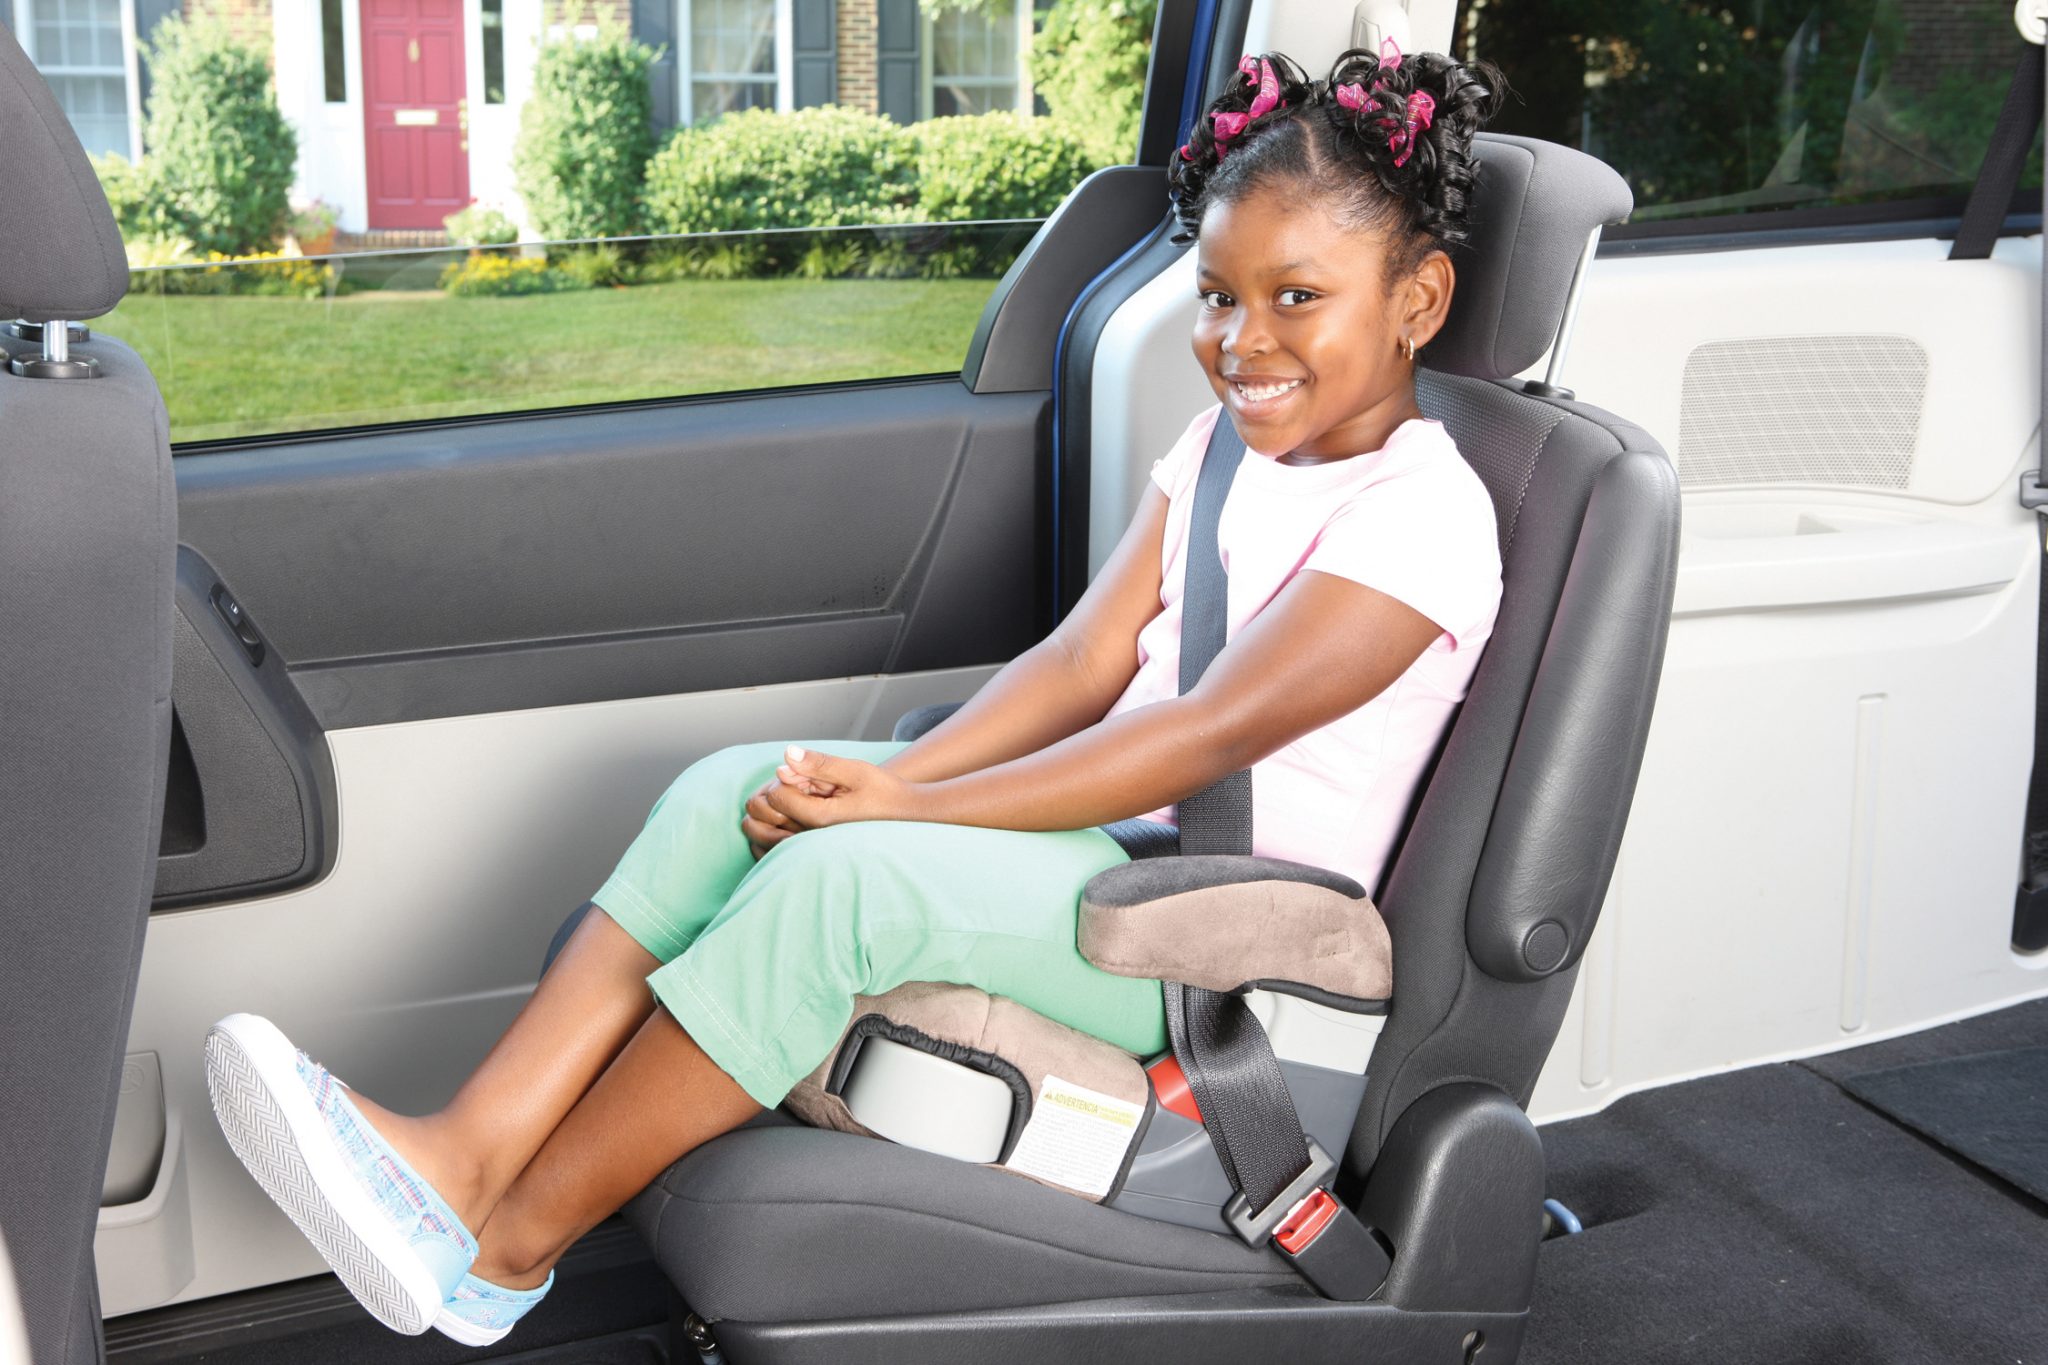 Buckle Up Booster Seats Finds Children Leave Booster Seats Too